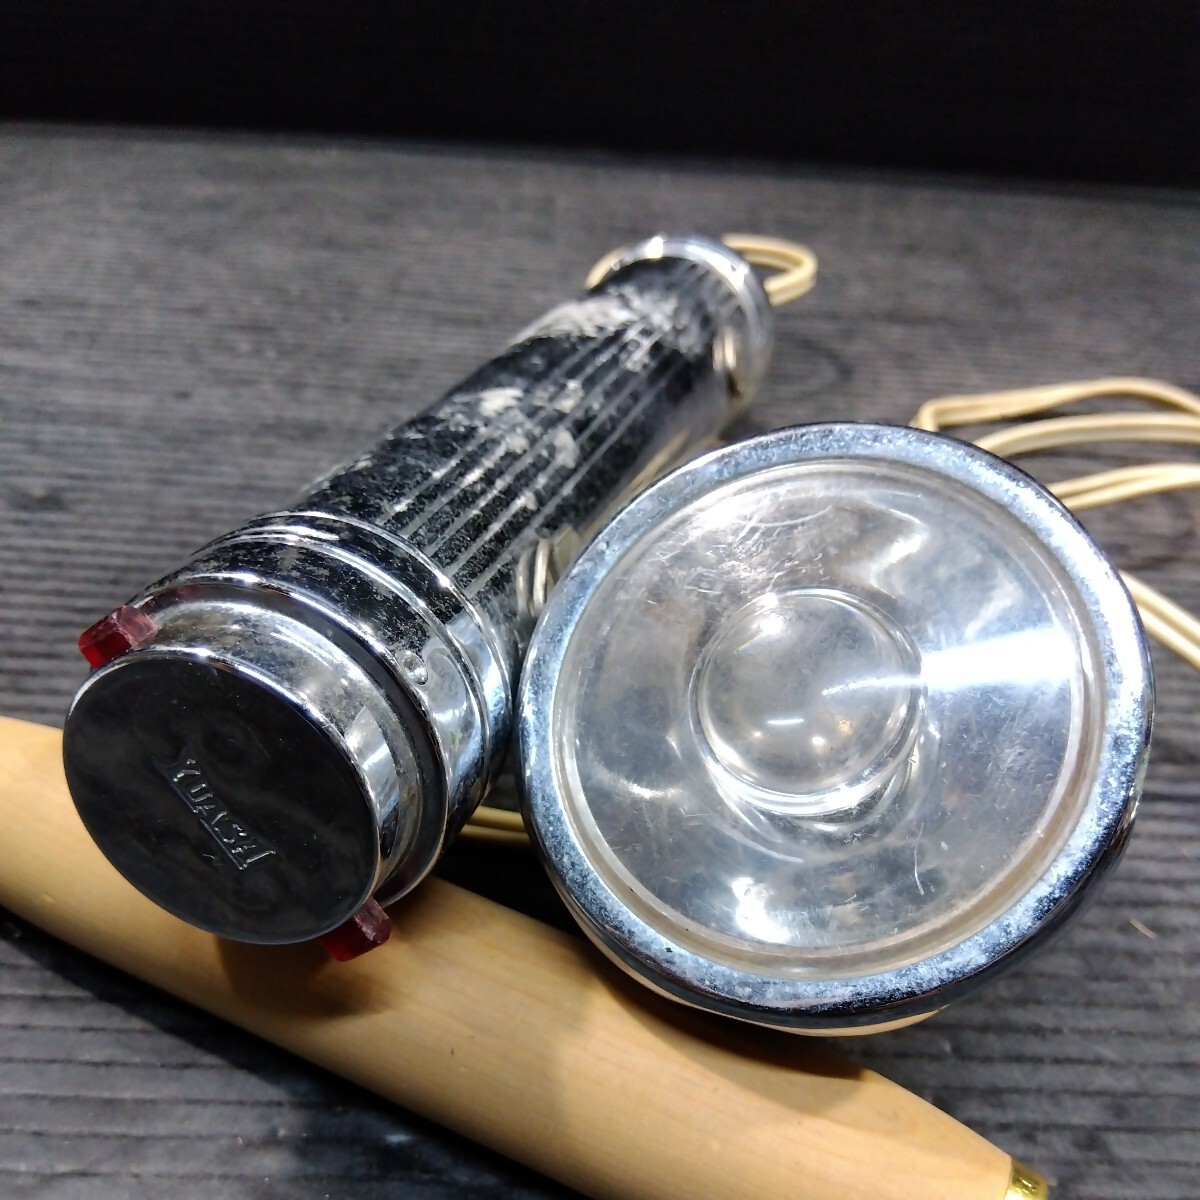  Toshiba National Hitachi NOVEL YUASA flashlight together / Showa Retro that time thing electric electro- light Vintage old tool old former times present condition goods 